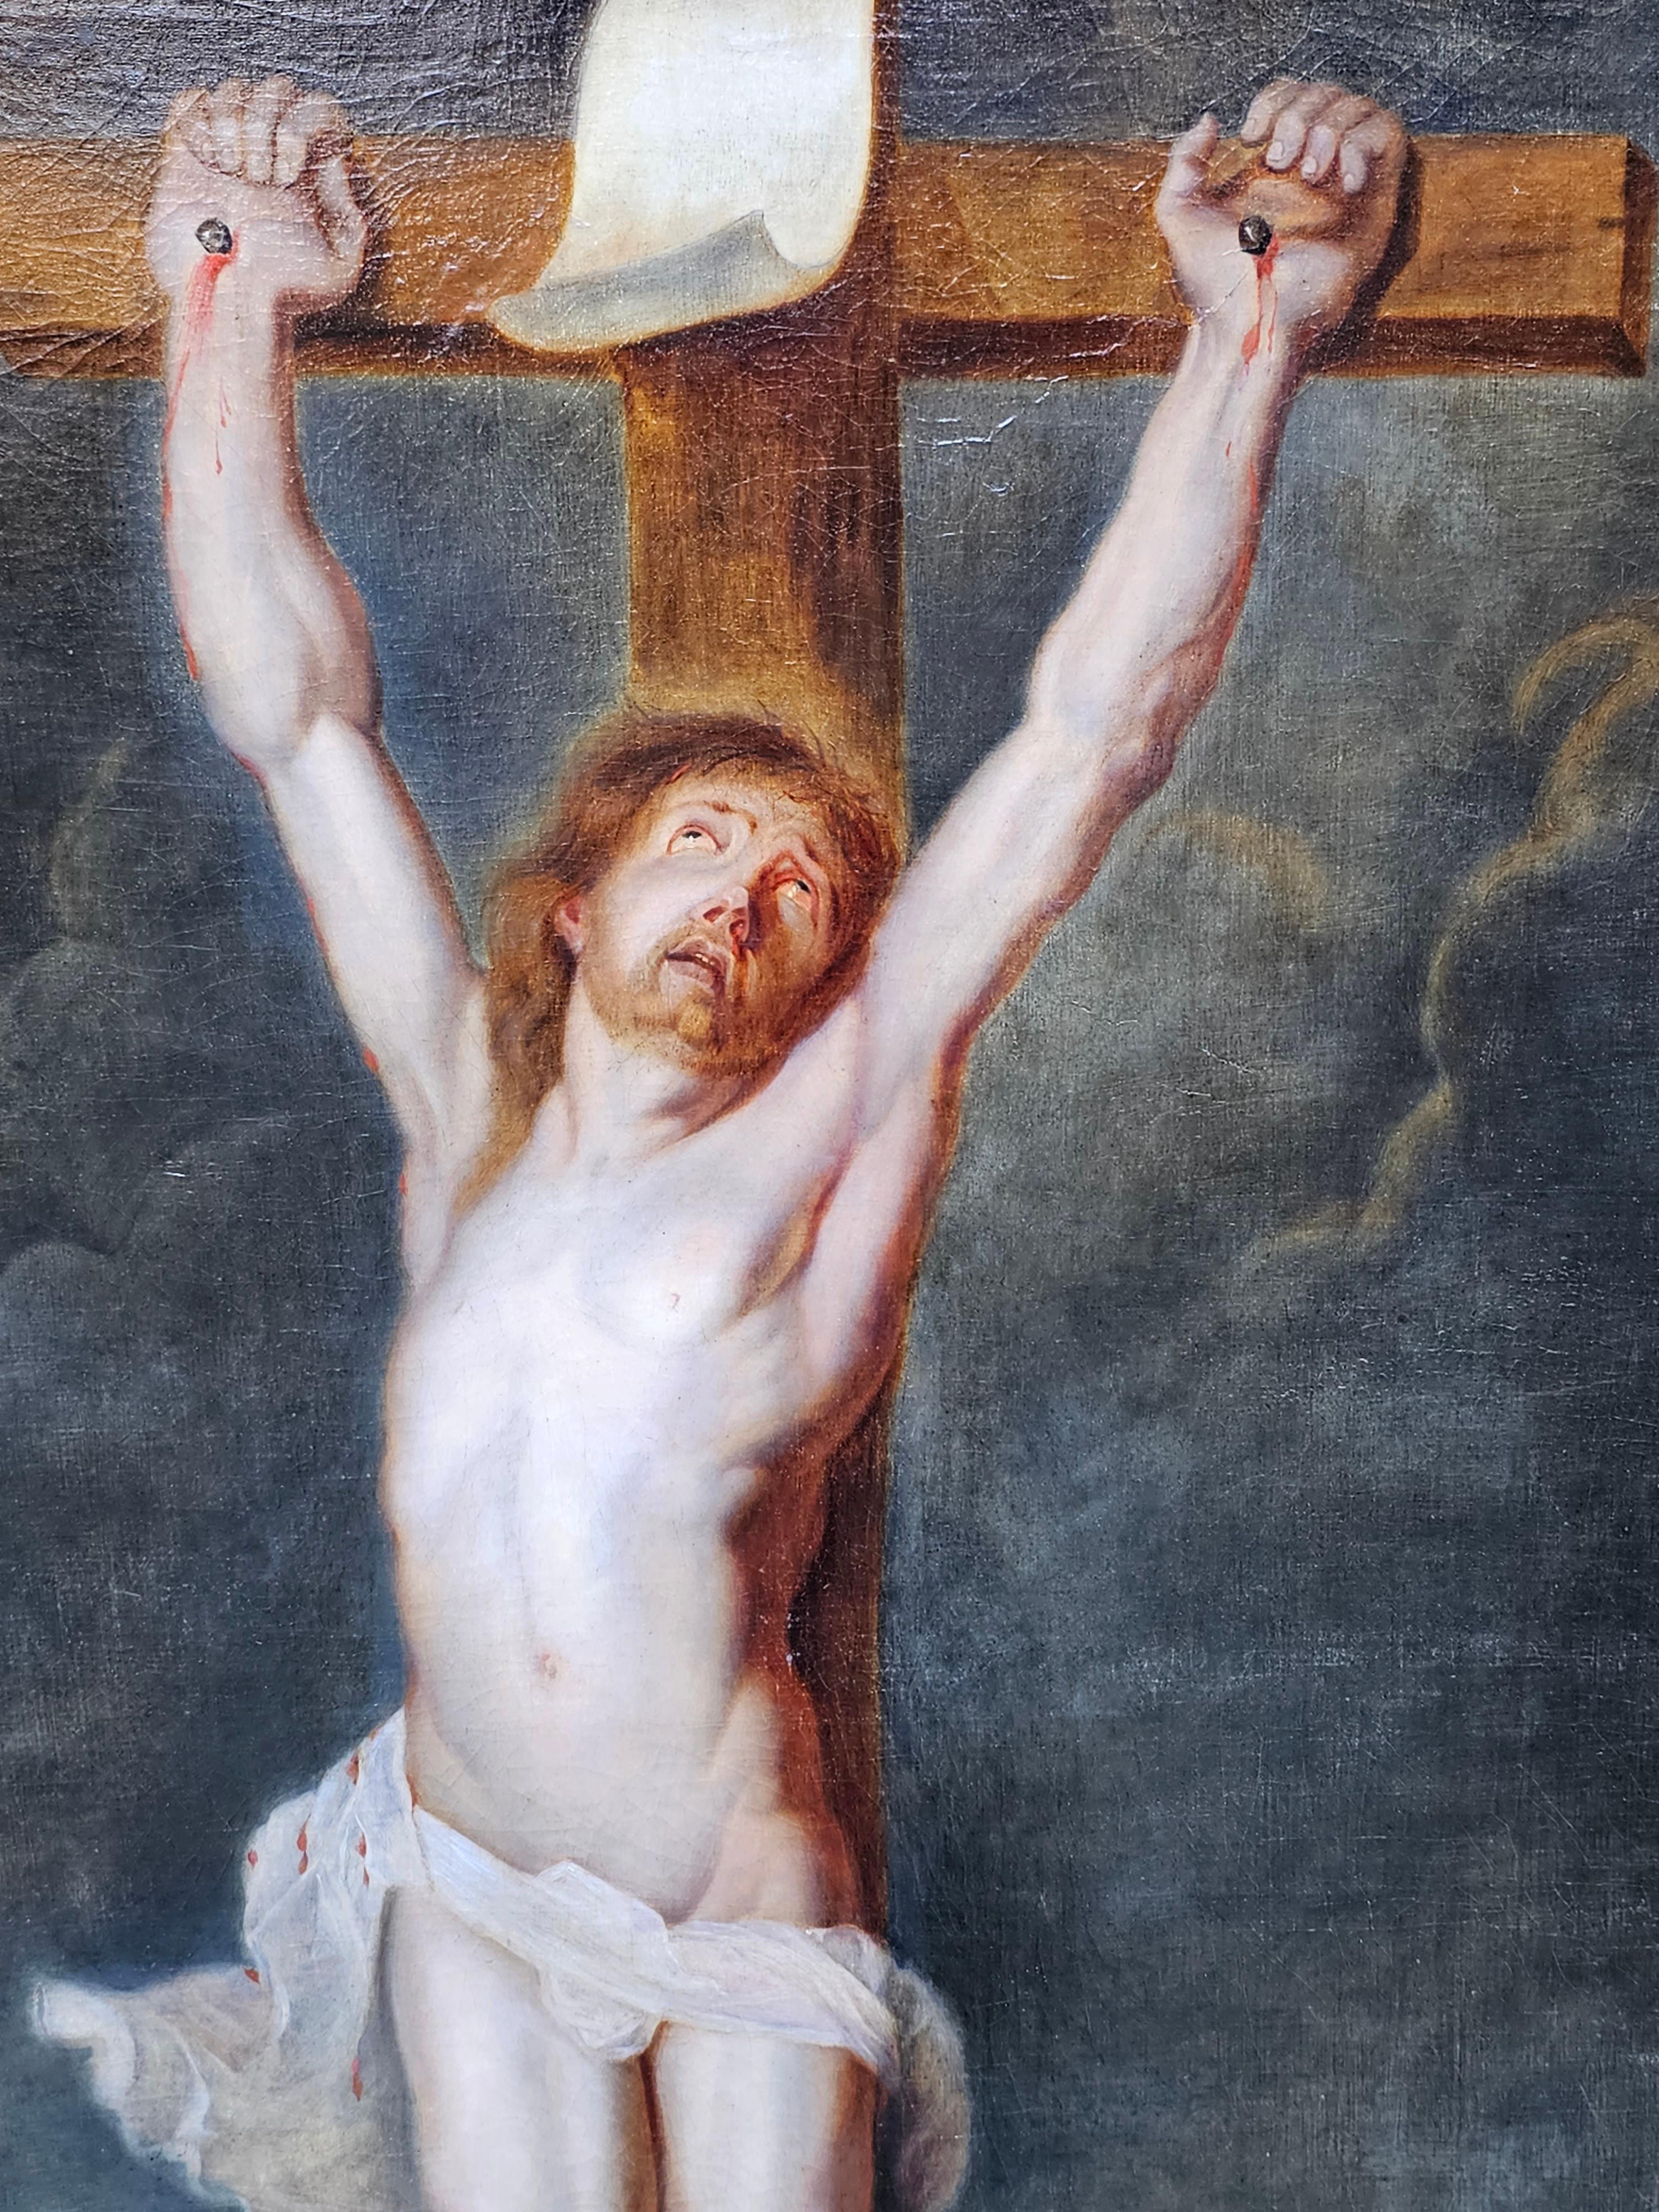 This stunning Old Master oil painting is attributed to a follower of Anthony Van Dyck. Painted in the 18th century it is a superb large religious art work of the crucifixion of Christ, illuminated by moonlight against a dramatic sky with dwelling in